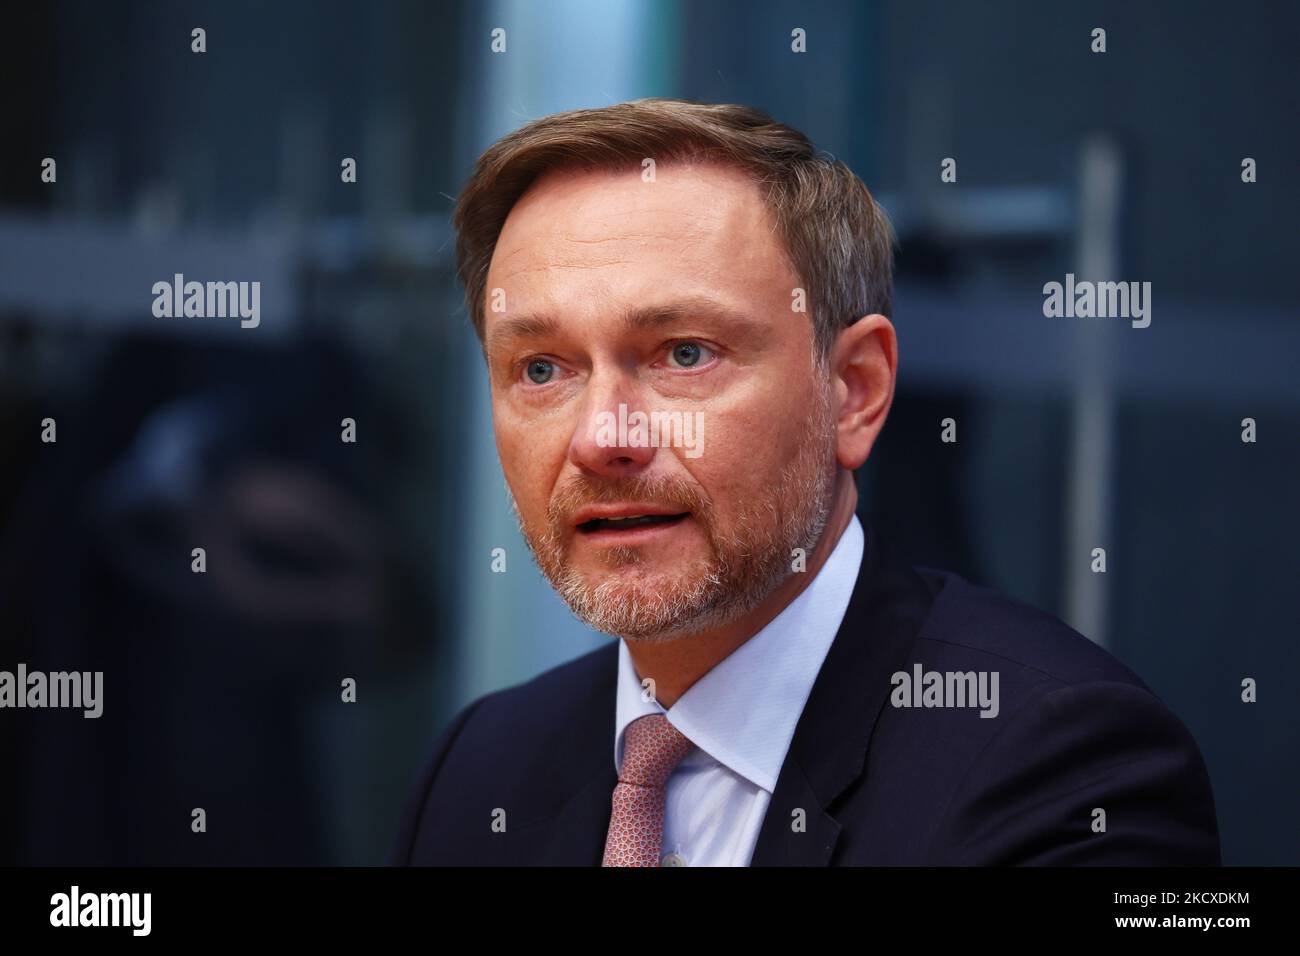 Designated Finance Minister Christian Lindner attends a press conference at the Bundespresssekonferenz after the Signing of the Coalition Agreement of the future German Government in Berlin on December 7, 2021. (Photo by Emmanuele Contini/NurPhoto) Stock Photo